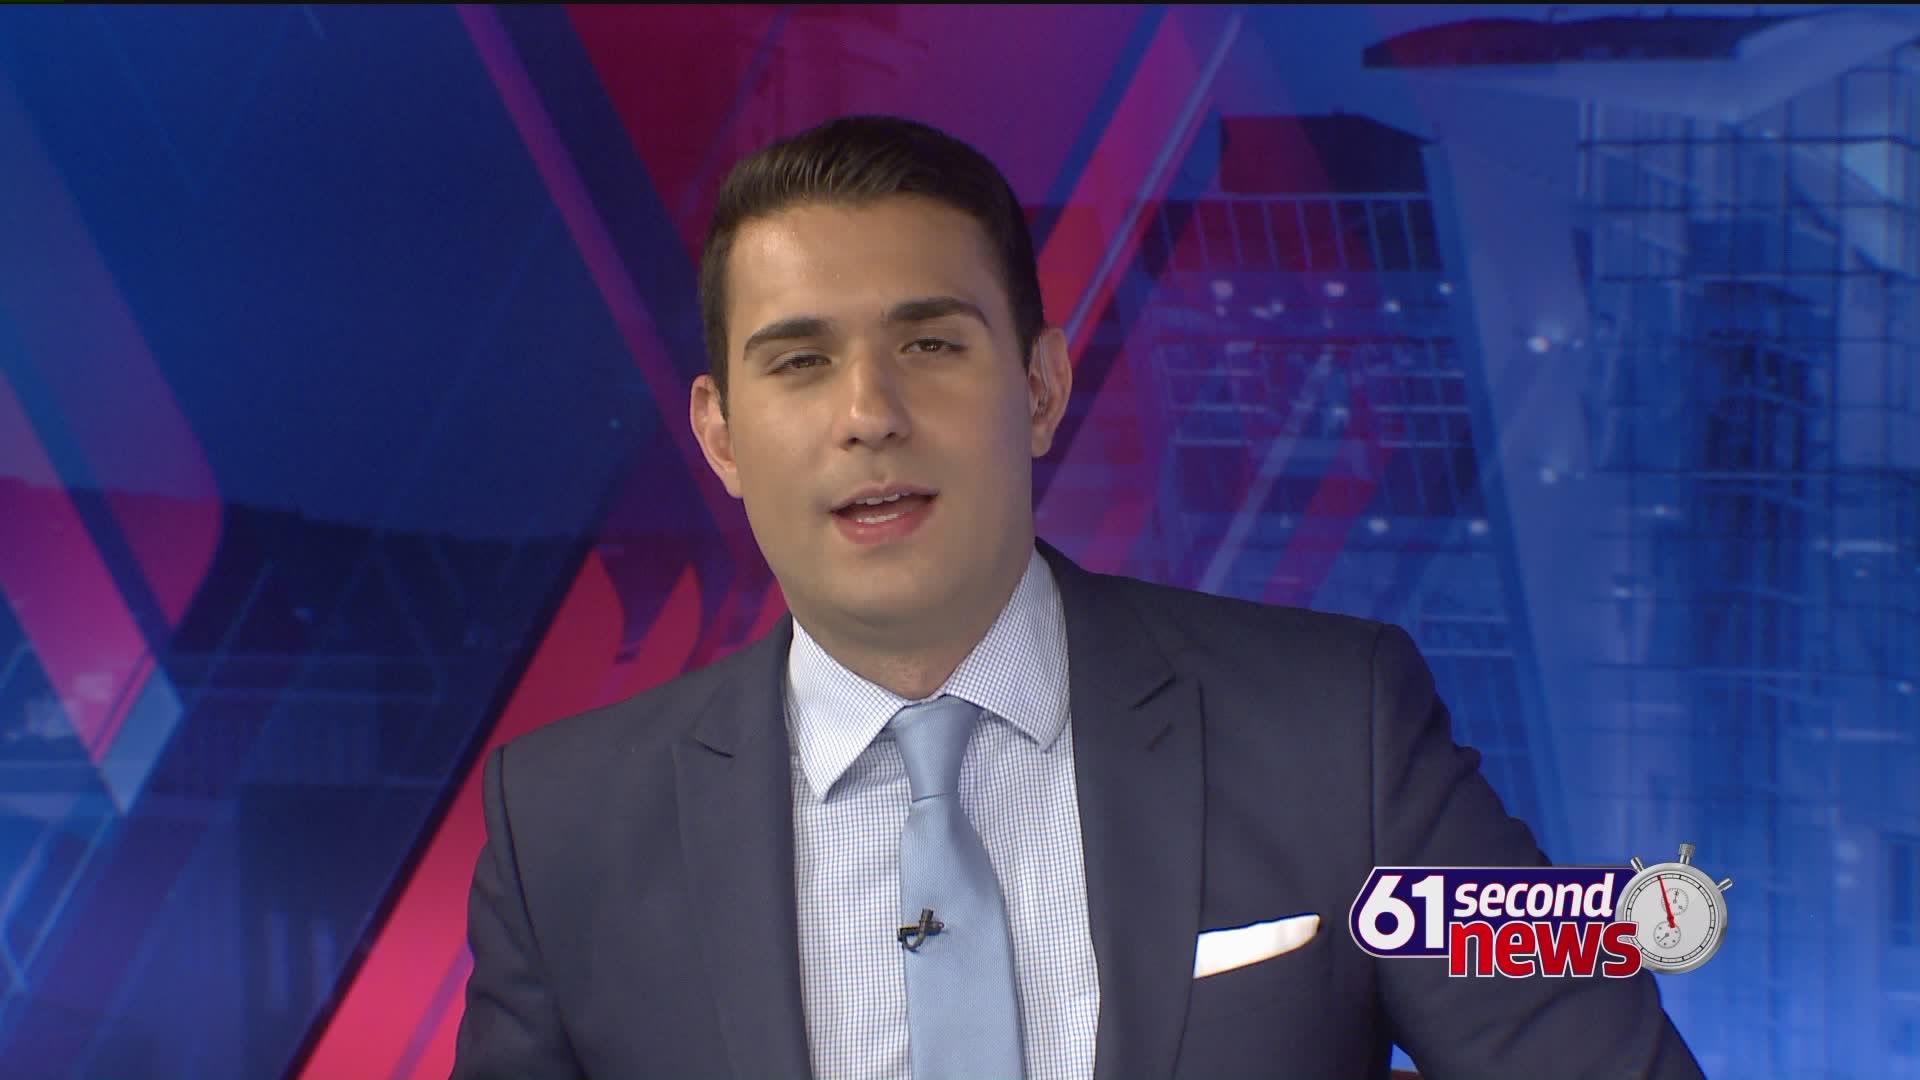 Angelo Bavaro has your #61SecondNews midday update on this Friday afternoon.